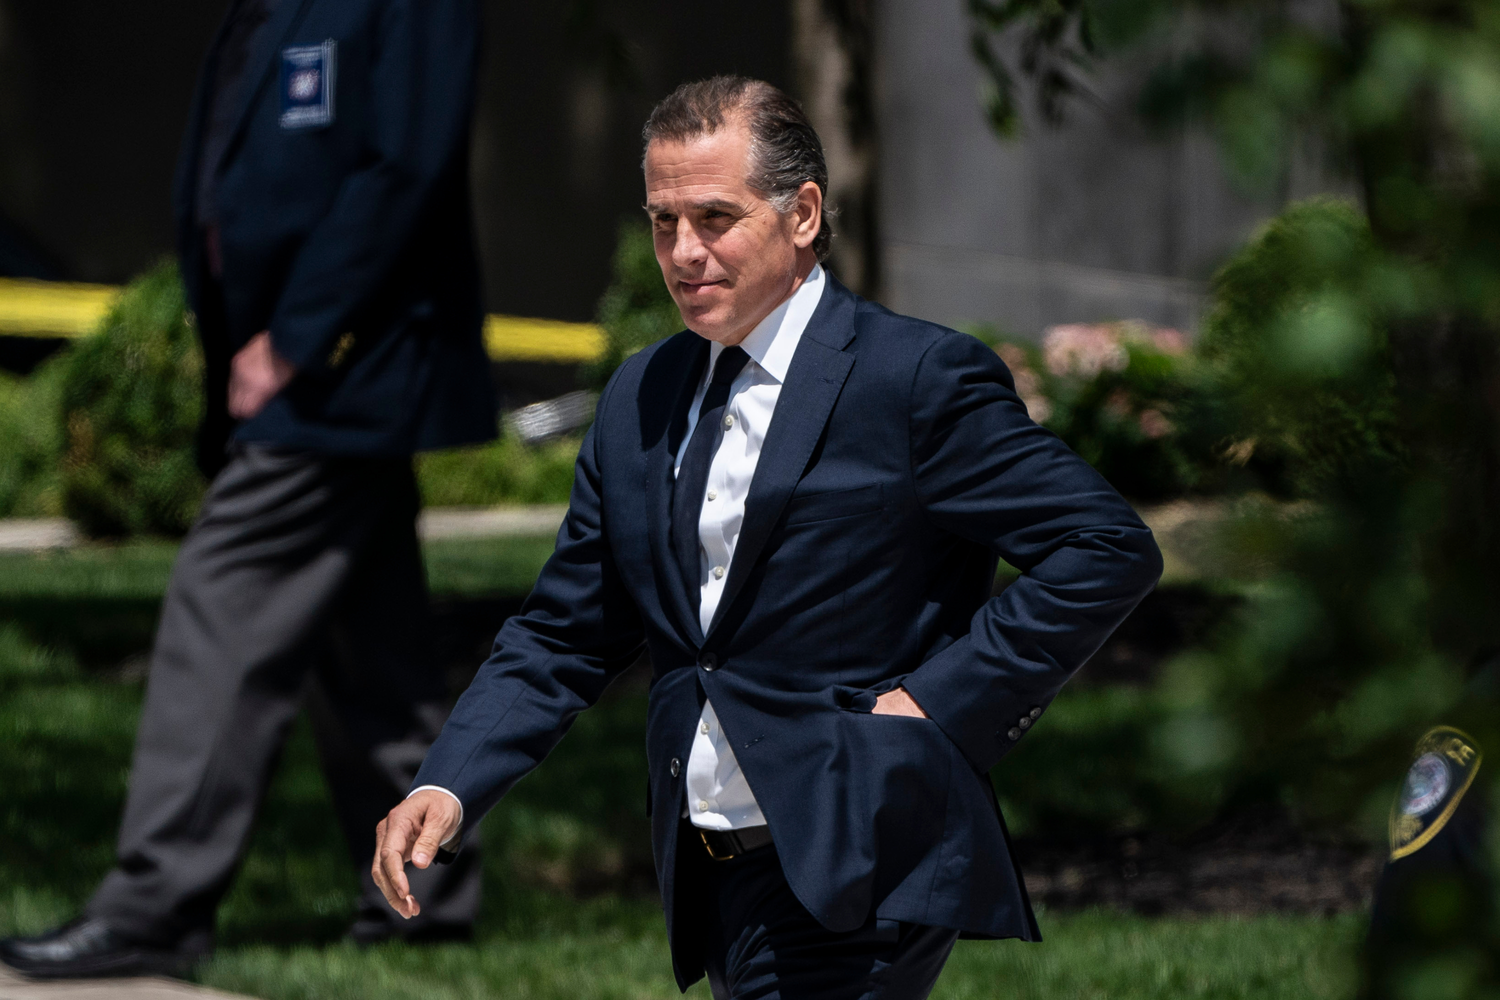 The attorney said that Hunter Biden just faced avastating take-down